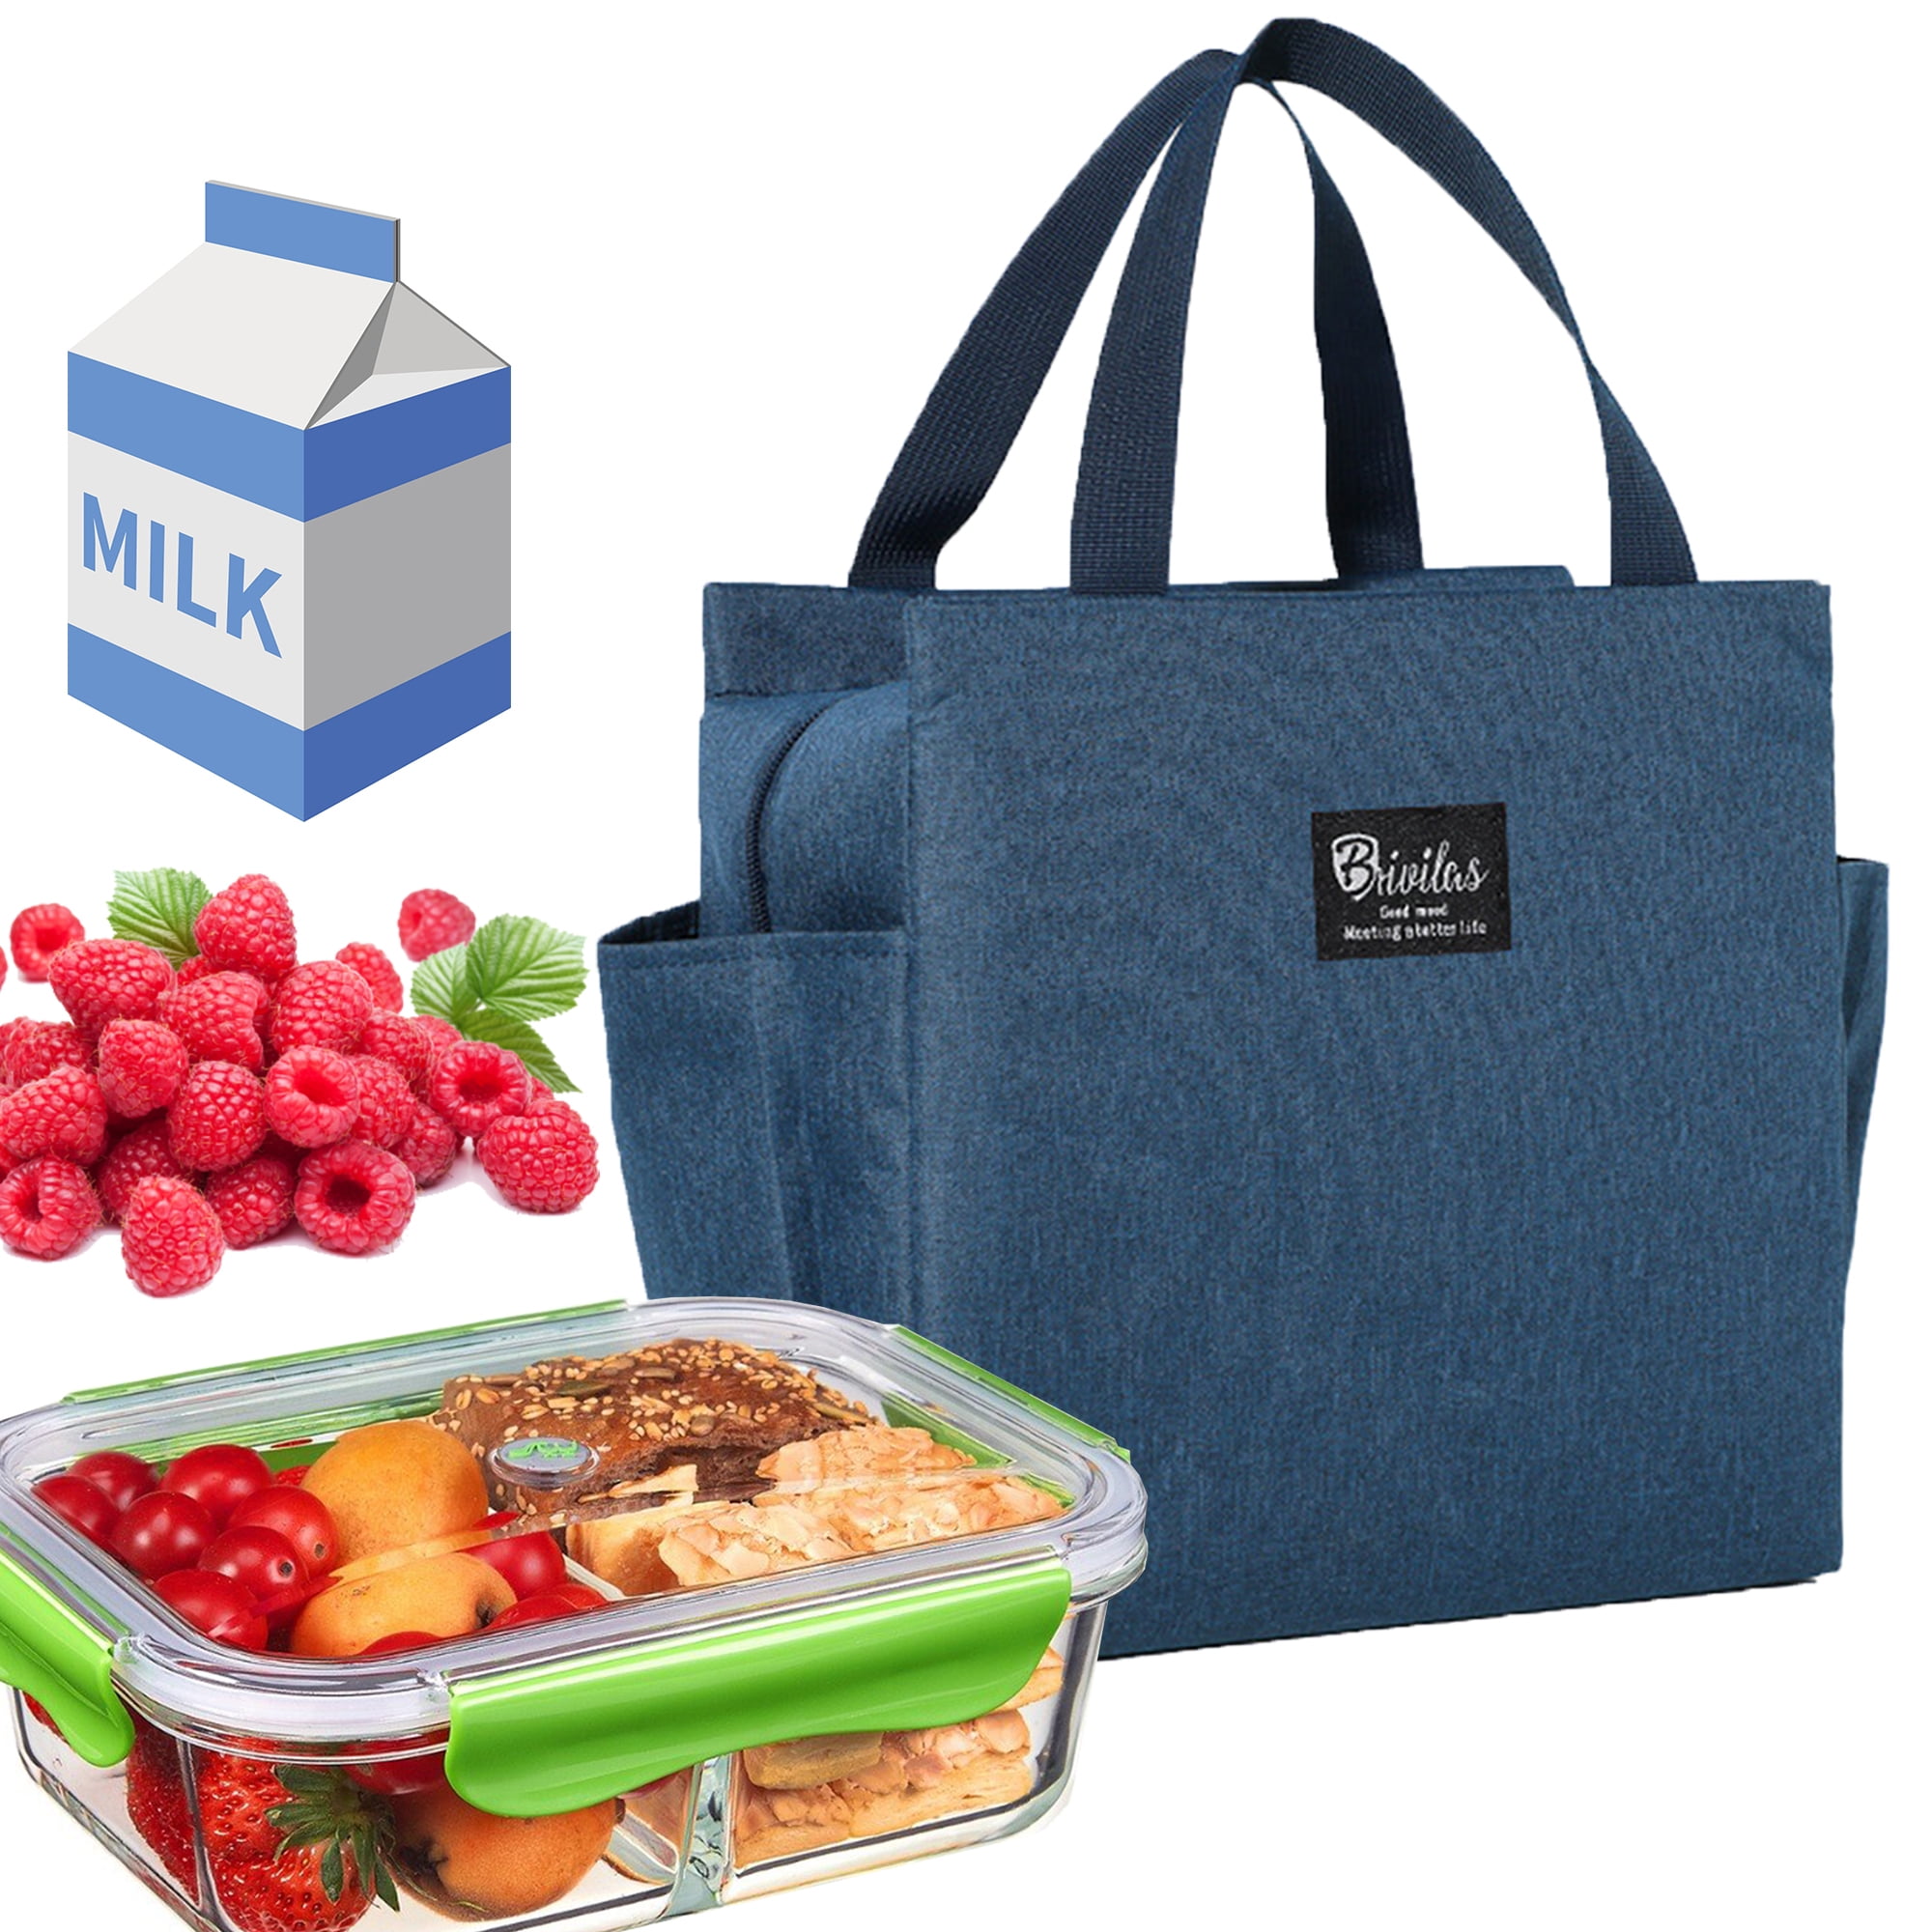 Buy Insulated Lunch Box and Cooler Bag for Men, Women, Kids (Tote